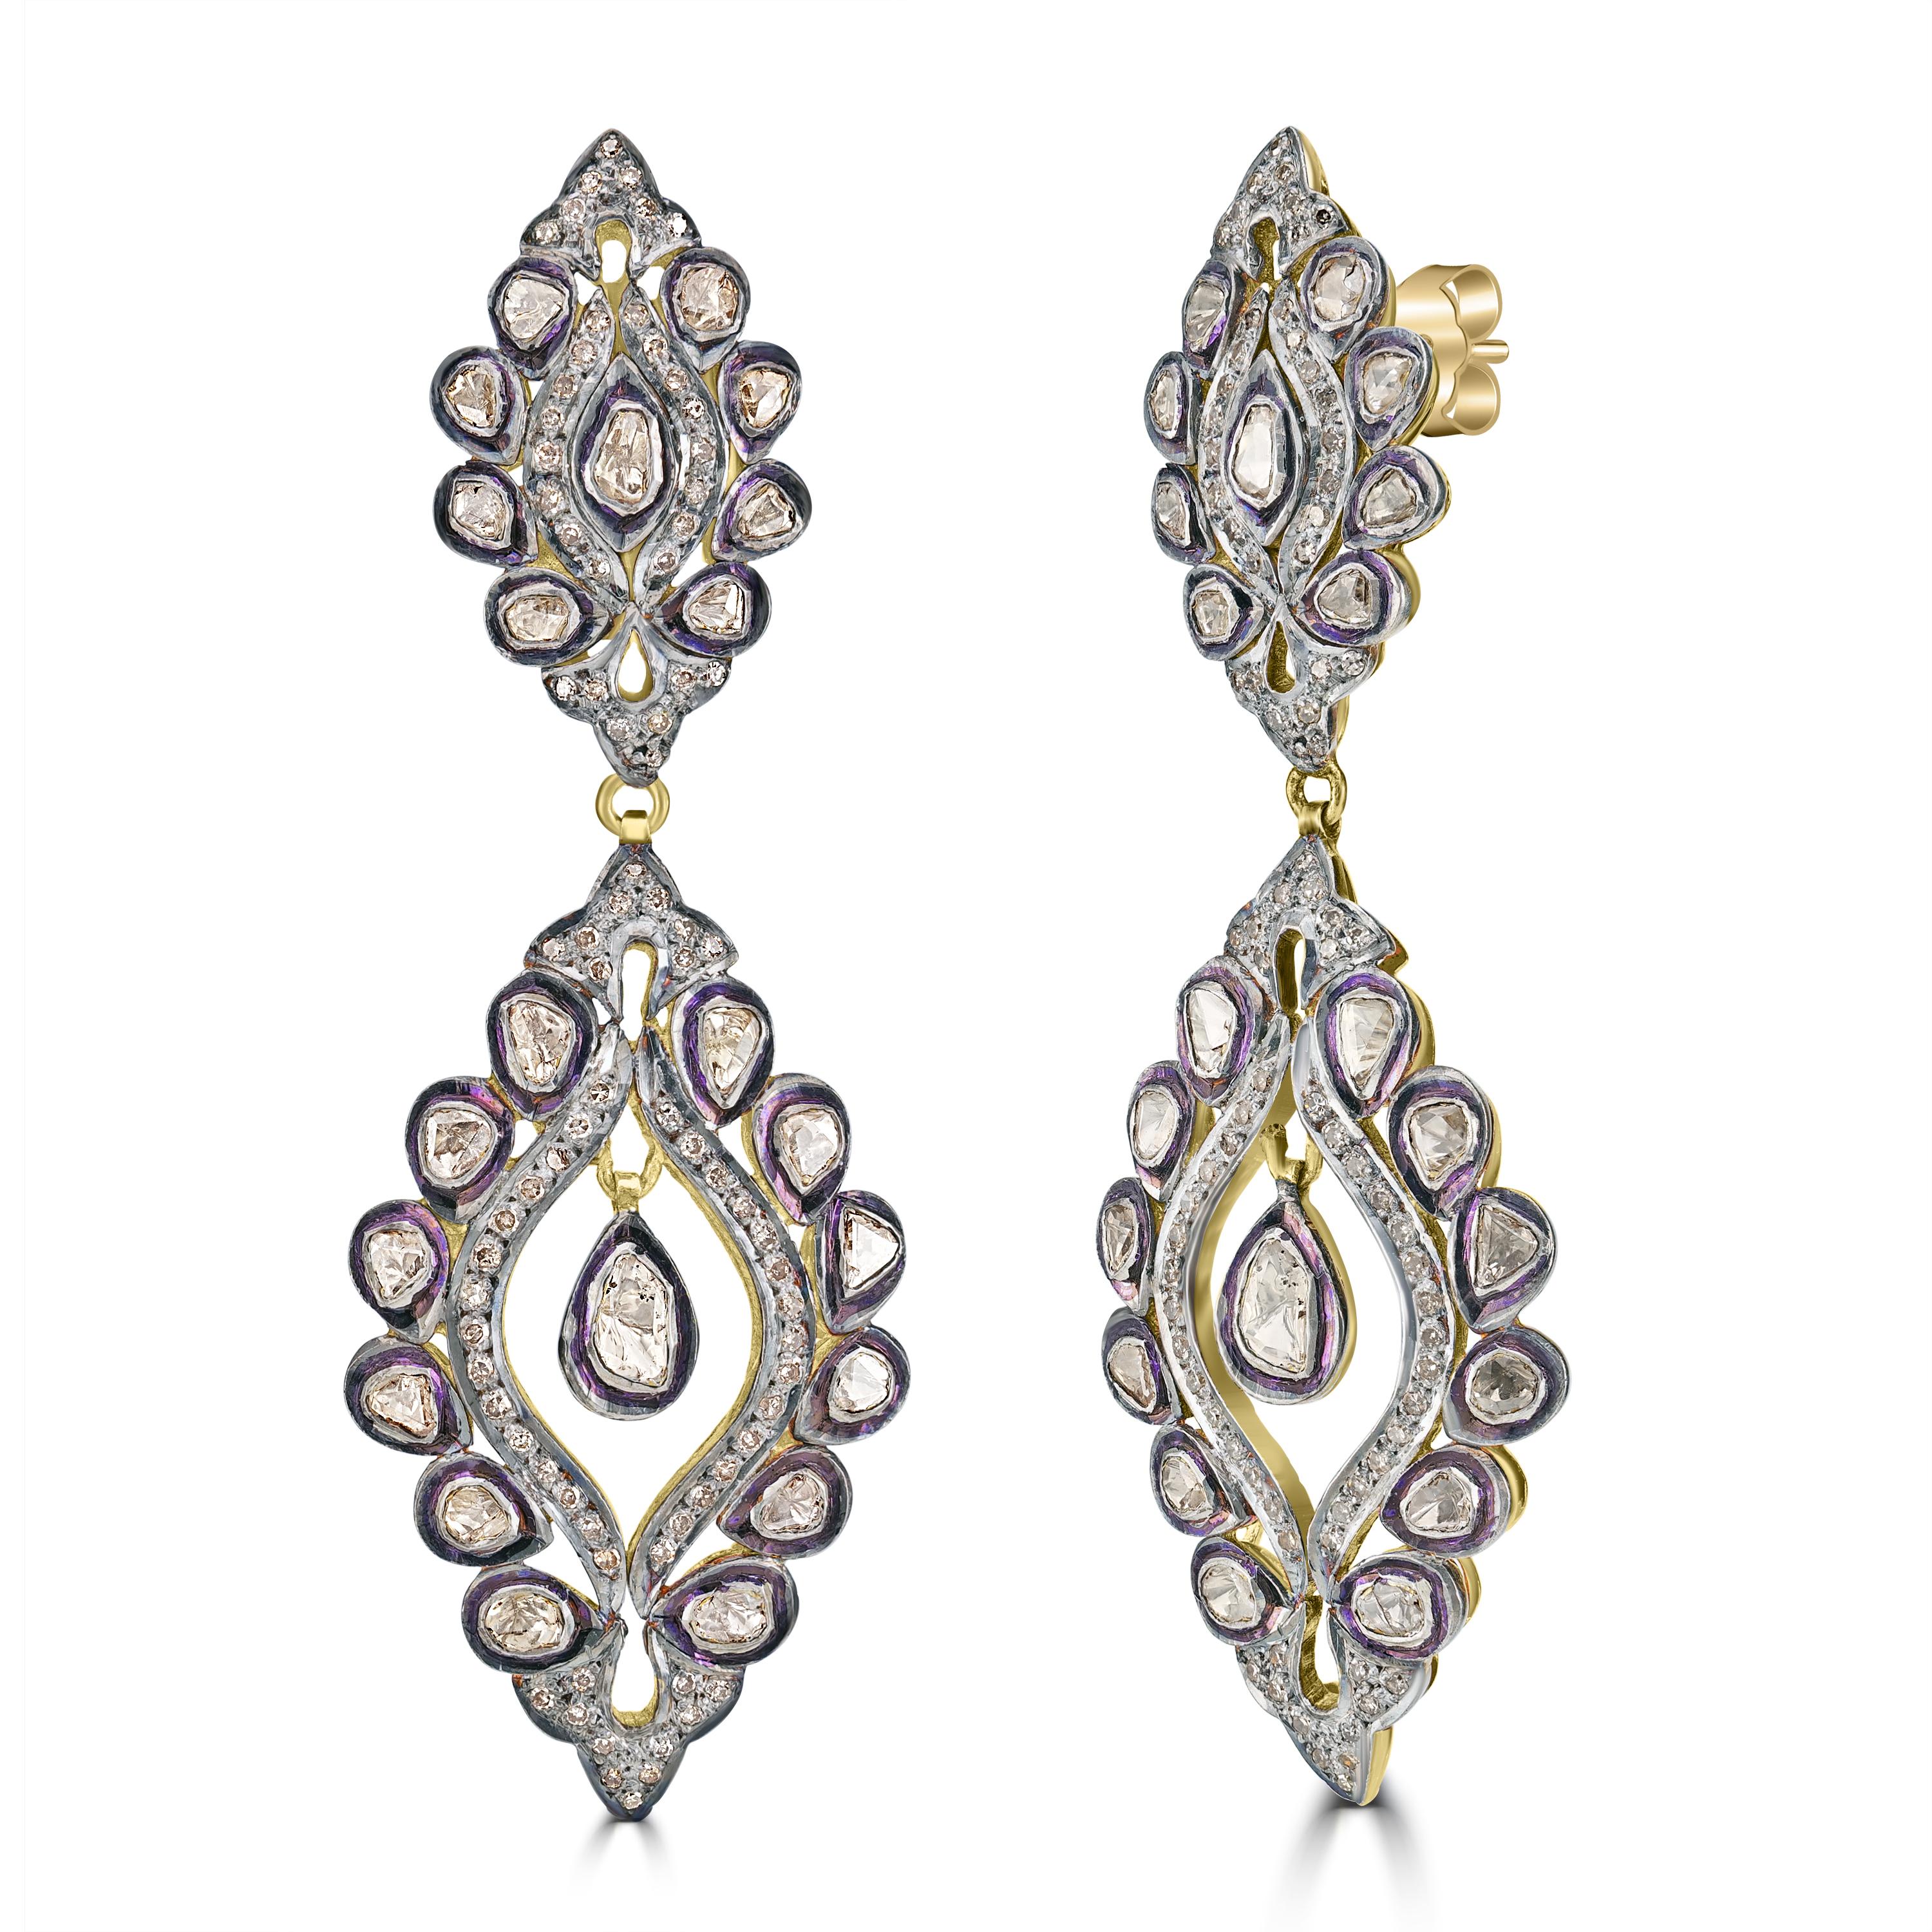 Introducing the Victorian 3.54 Cttw. Diamond Floral Dangle Earrings, a masterful blend of classic elegance and modern sophistication. These exquisite earrings are crafted from 18k yellow gold and sterling silver, adorned with black rhodium accents